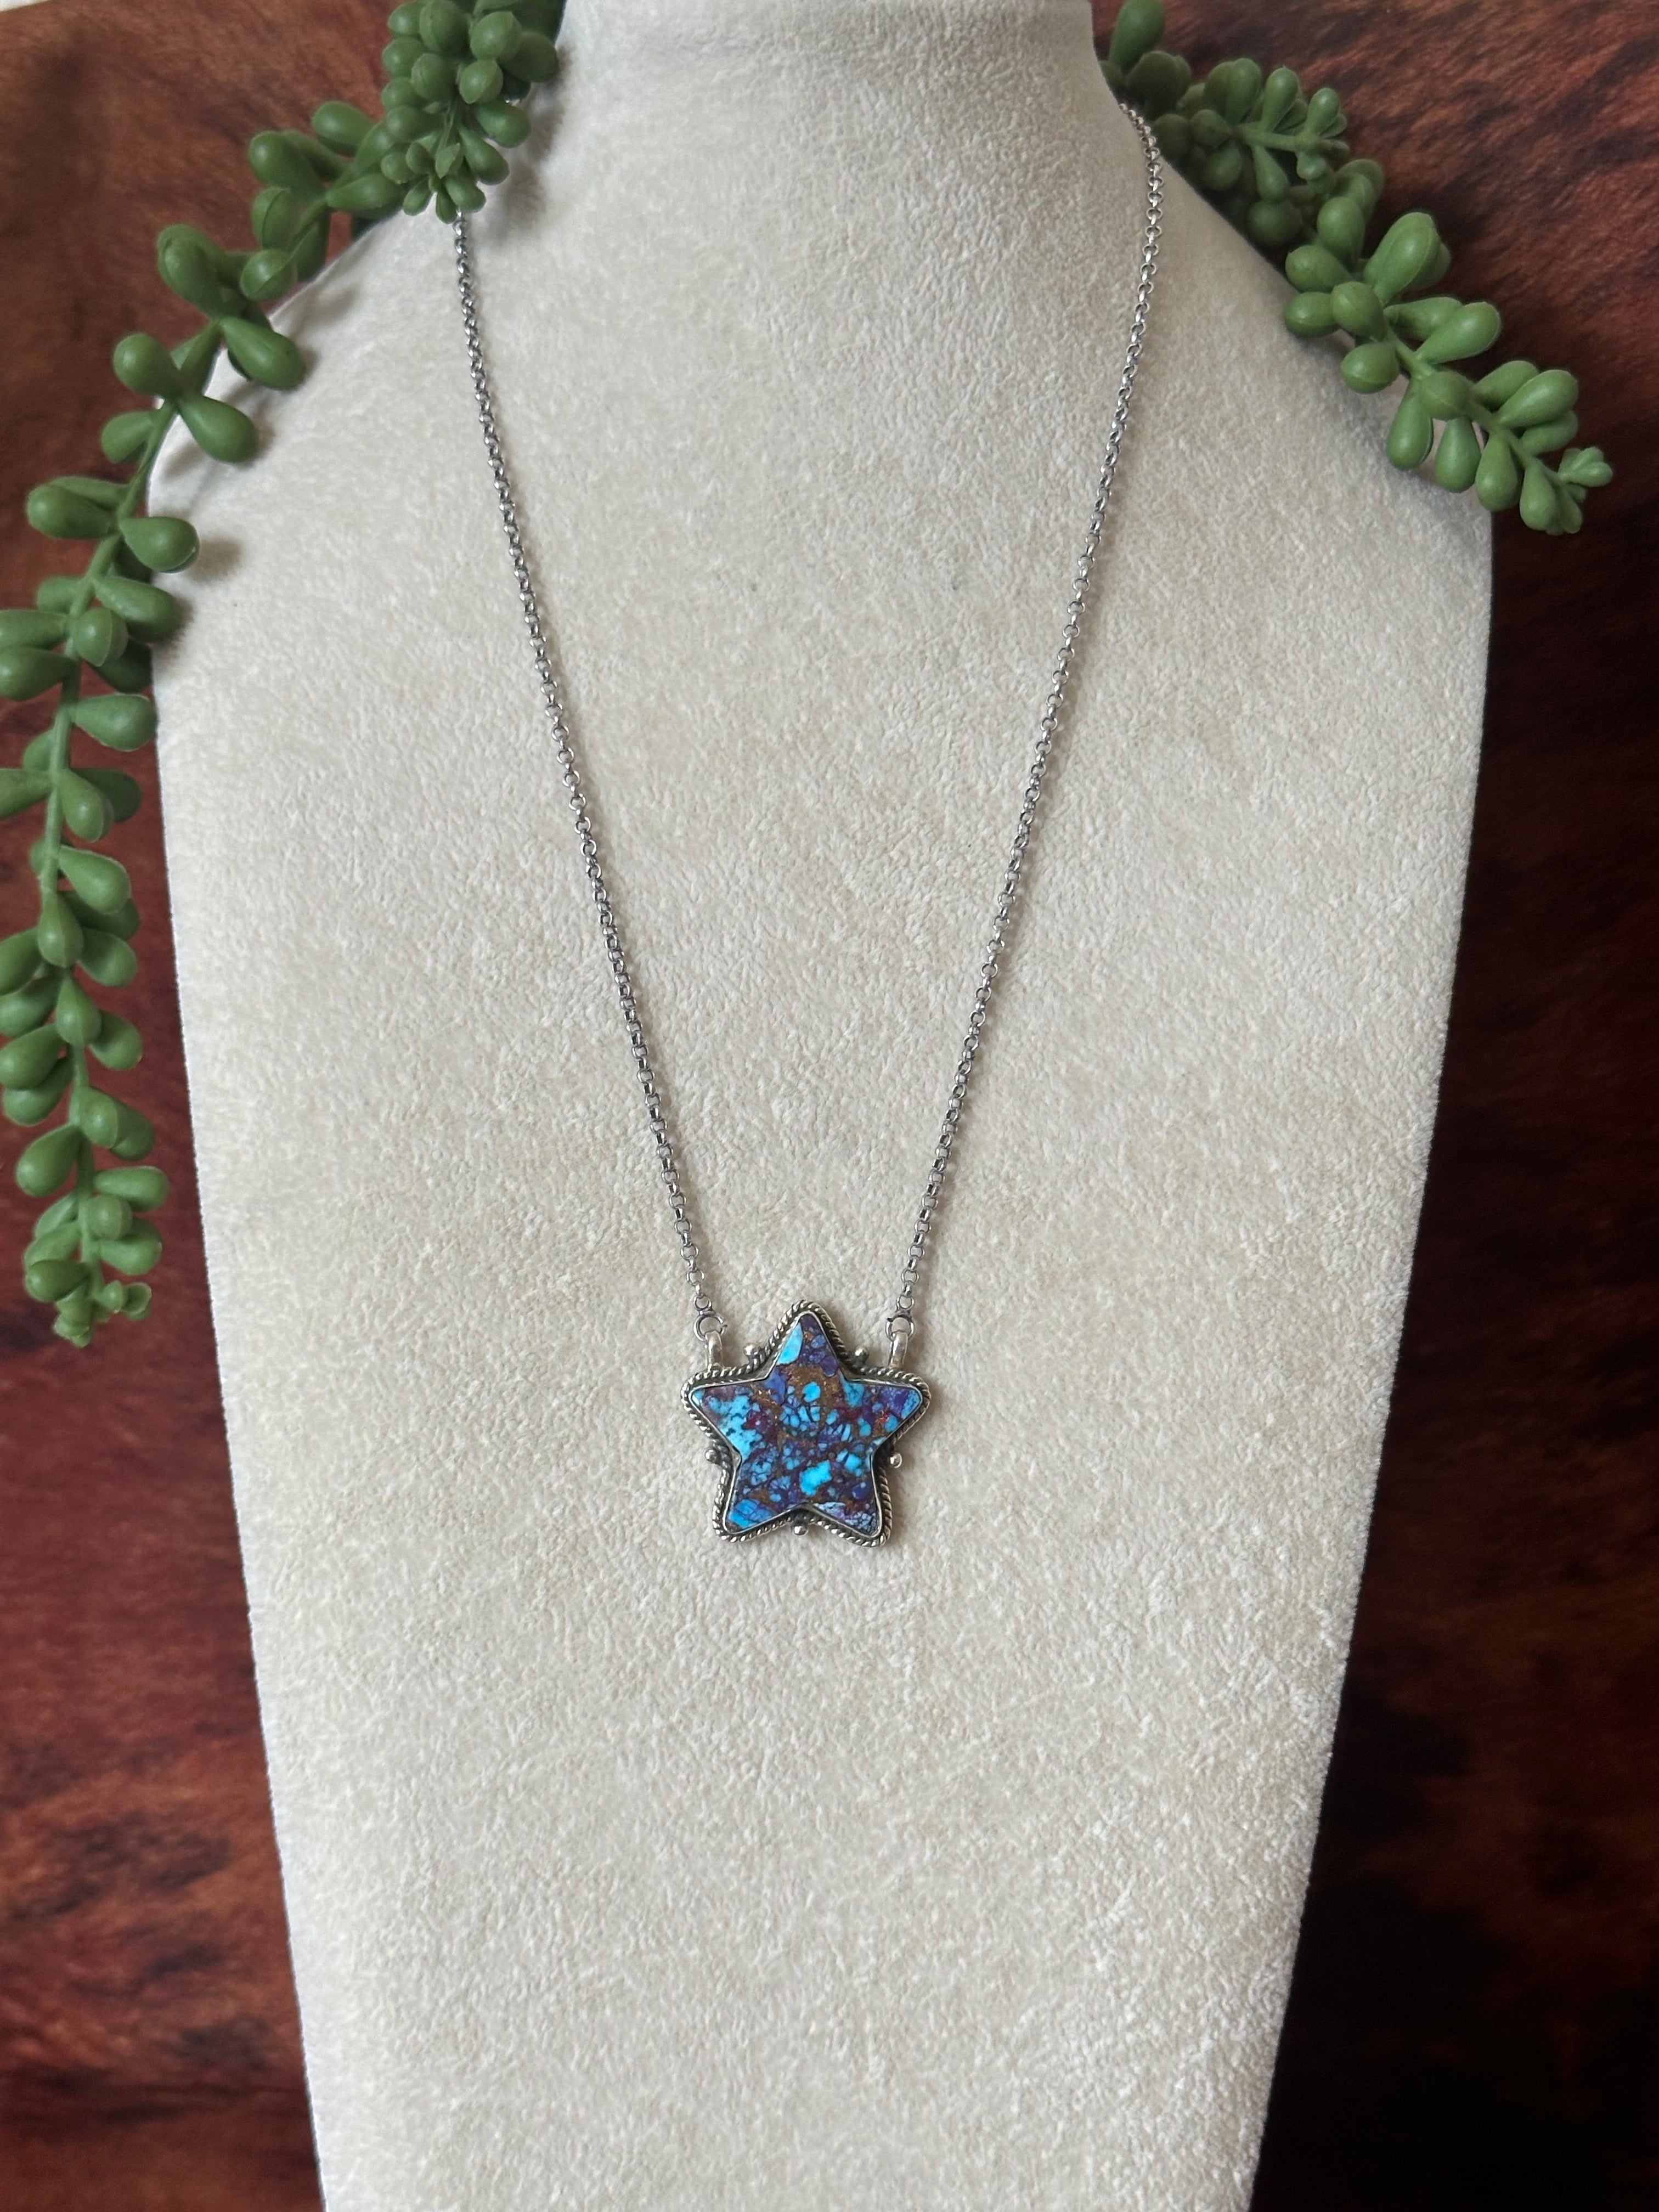 Southwest Handmade Purple Mohave Turquoise & Sterling Silver Star Necklace